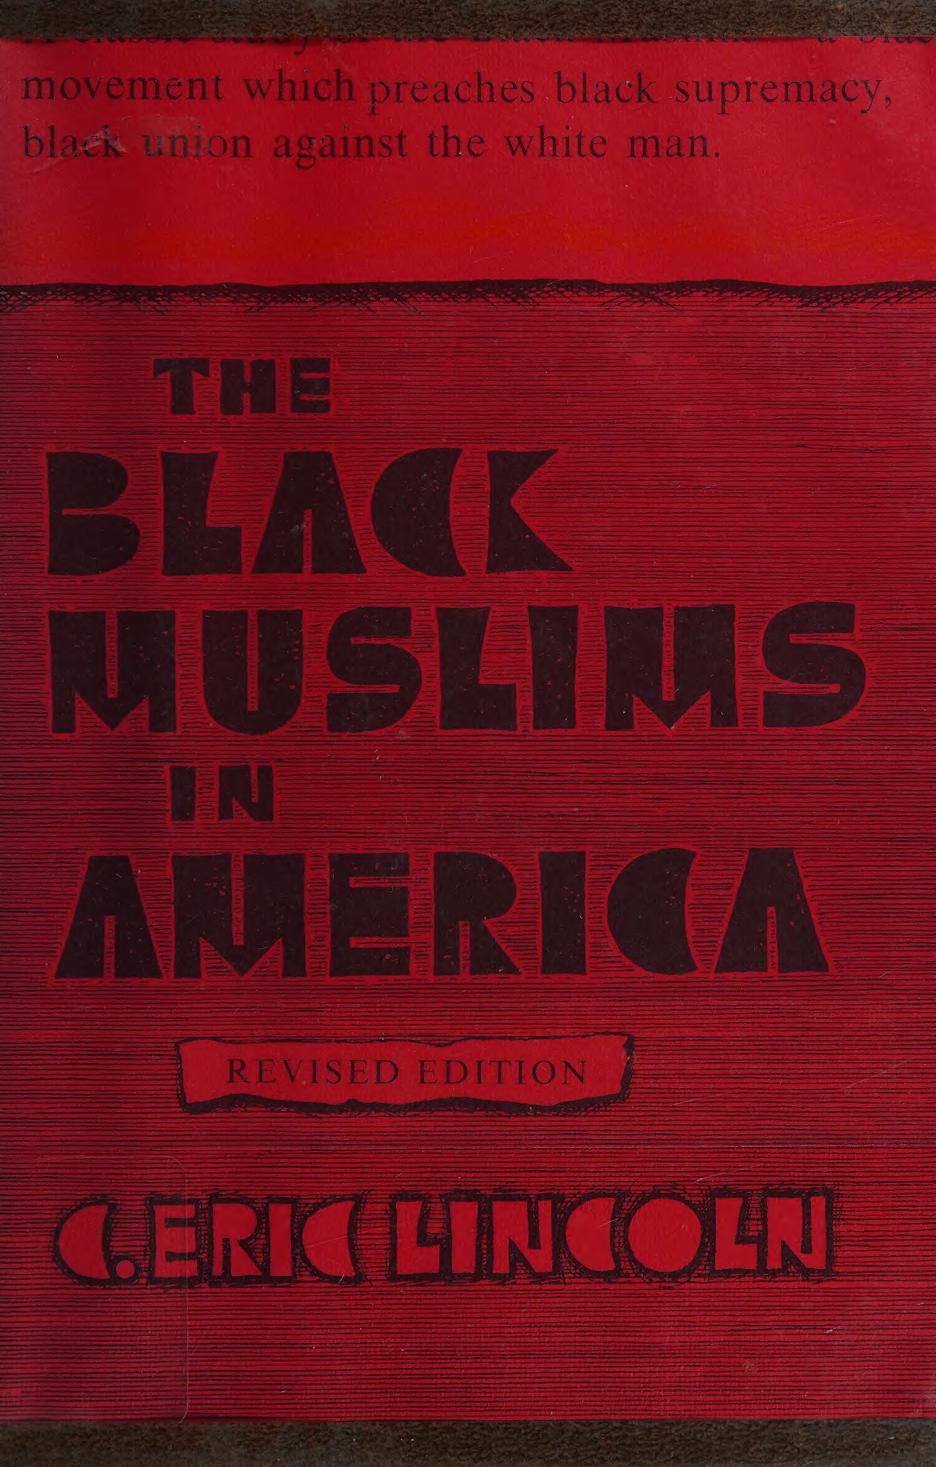 The Black muslims in America by C. Eric Lincoln